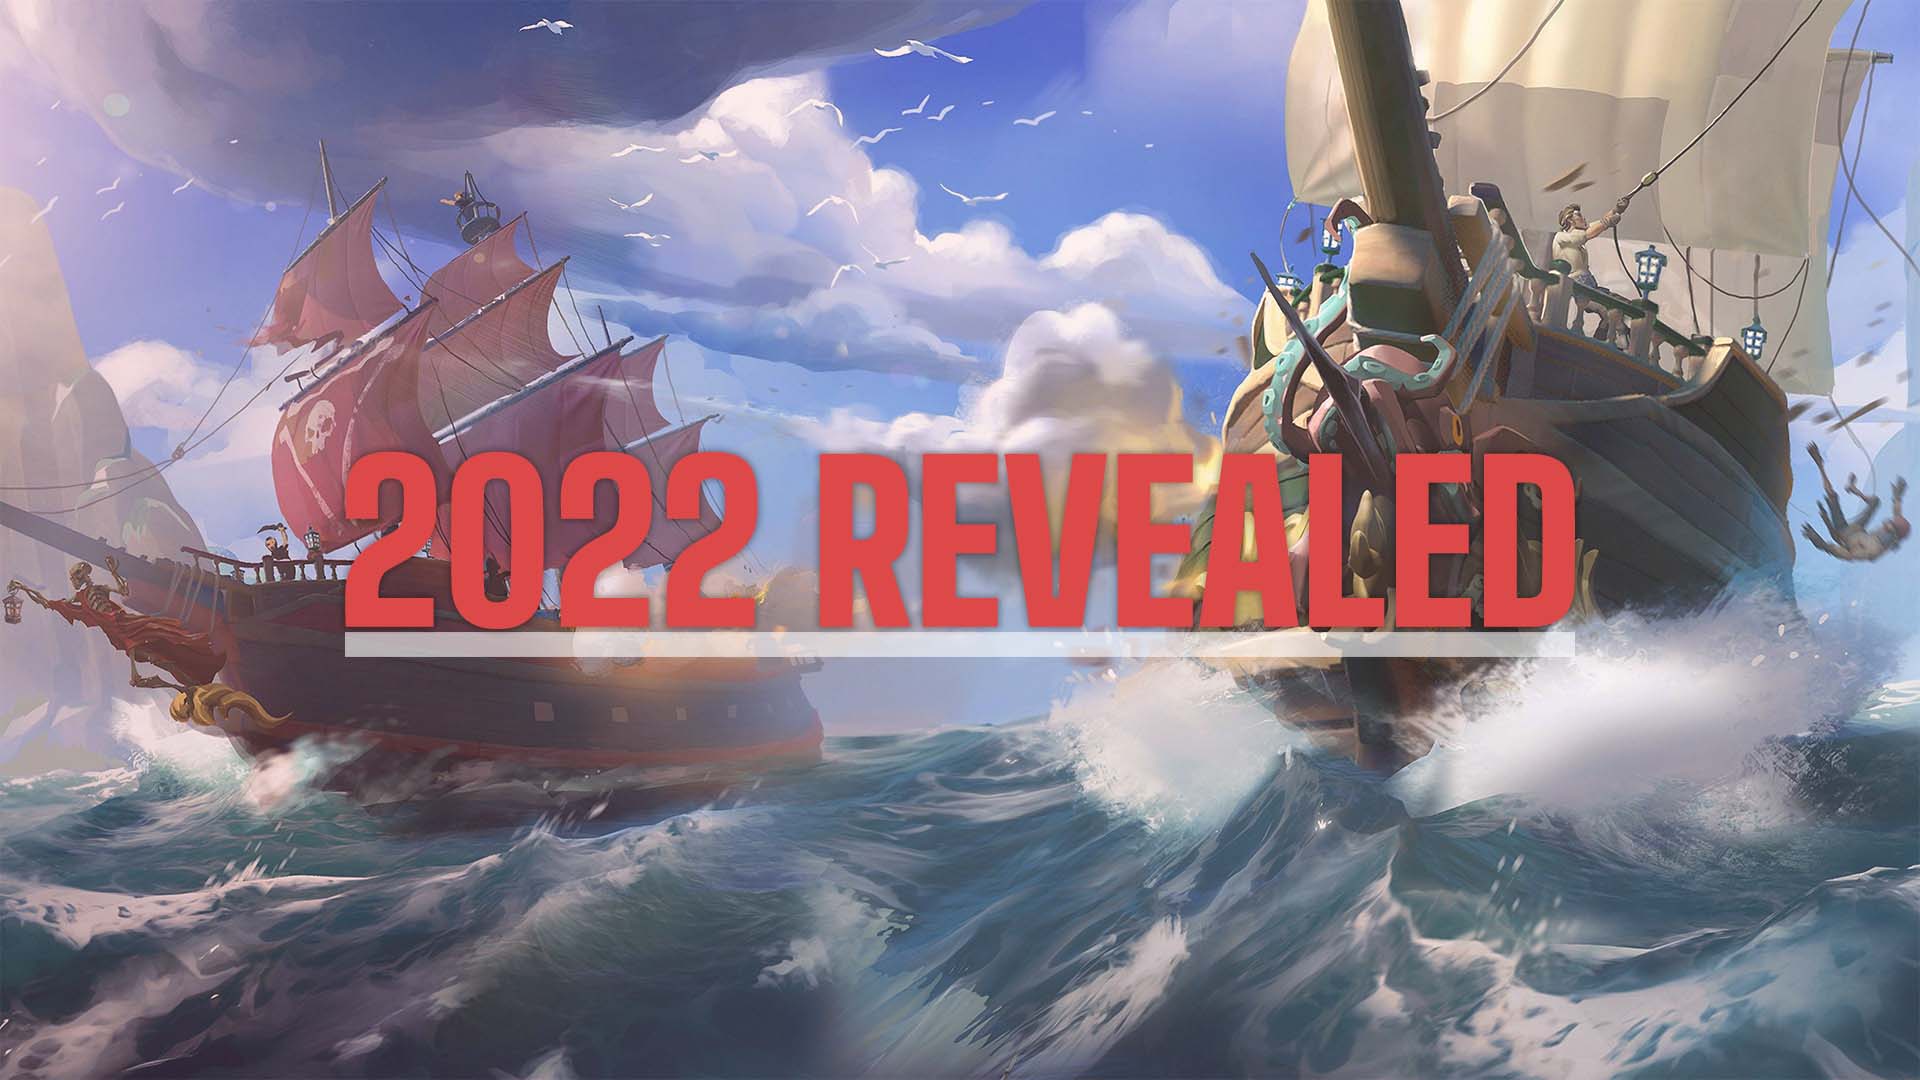 Image for Sea of Thieves 2022 roadmap goes big on adventures